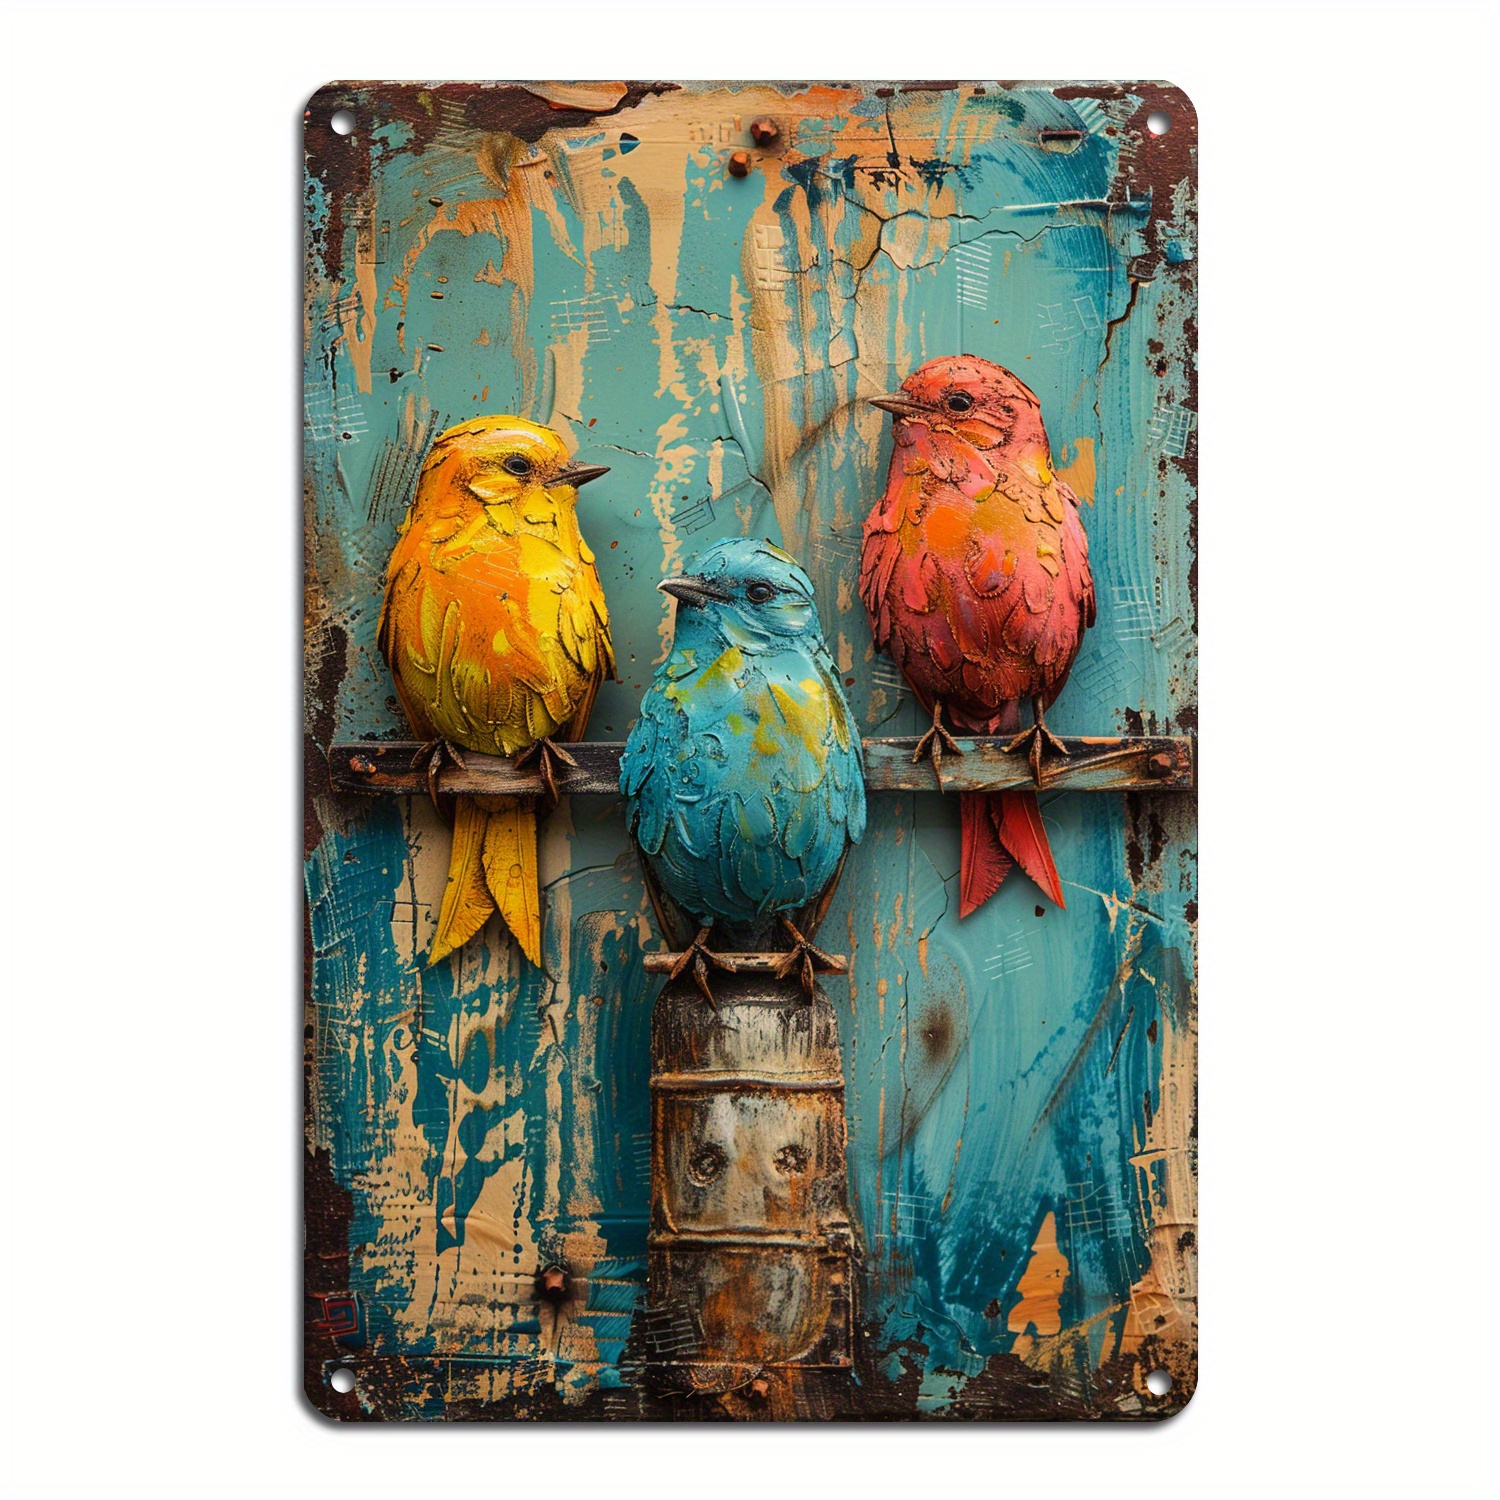 

1pc 8x12inch Cute Wildlife Robin Metal Tin Sign, Vintage Poster Painiting, For Home Kitchen Dining Room Bedroom Garden Bathroom Garage Hotel Office Bakery Decor